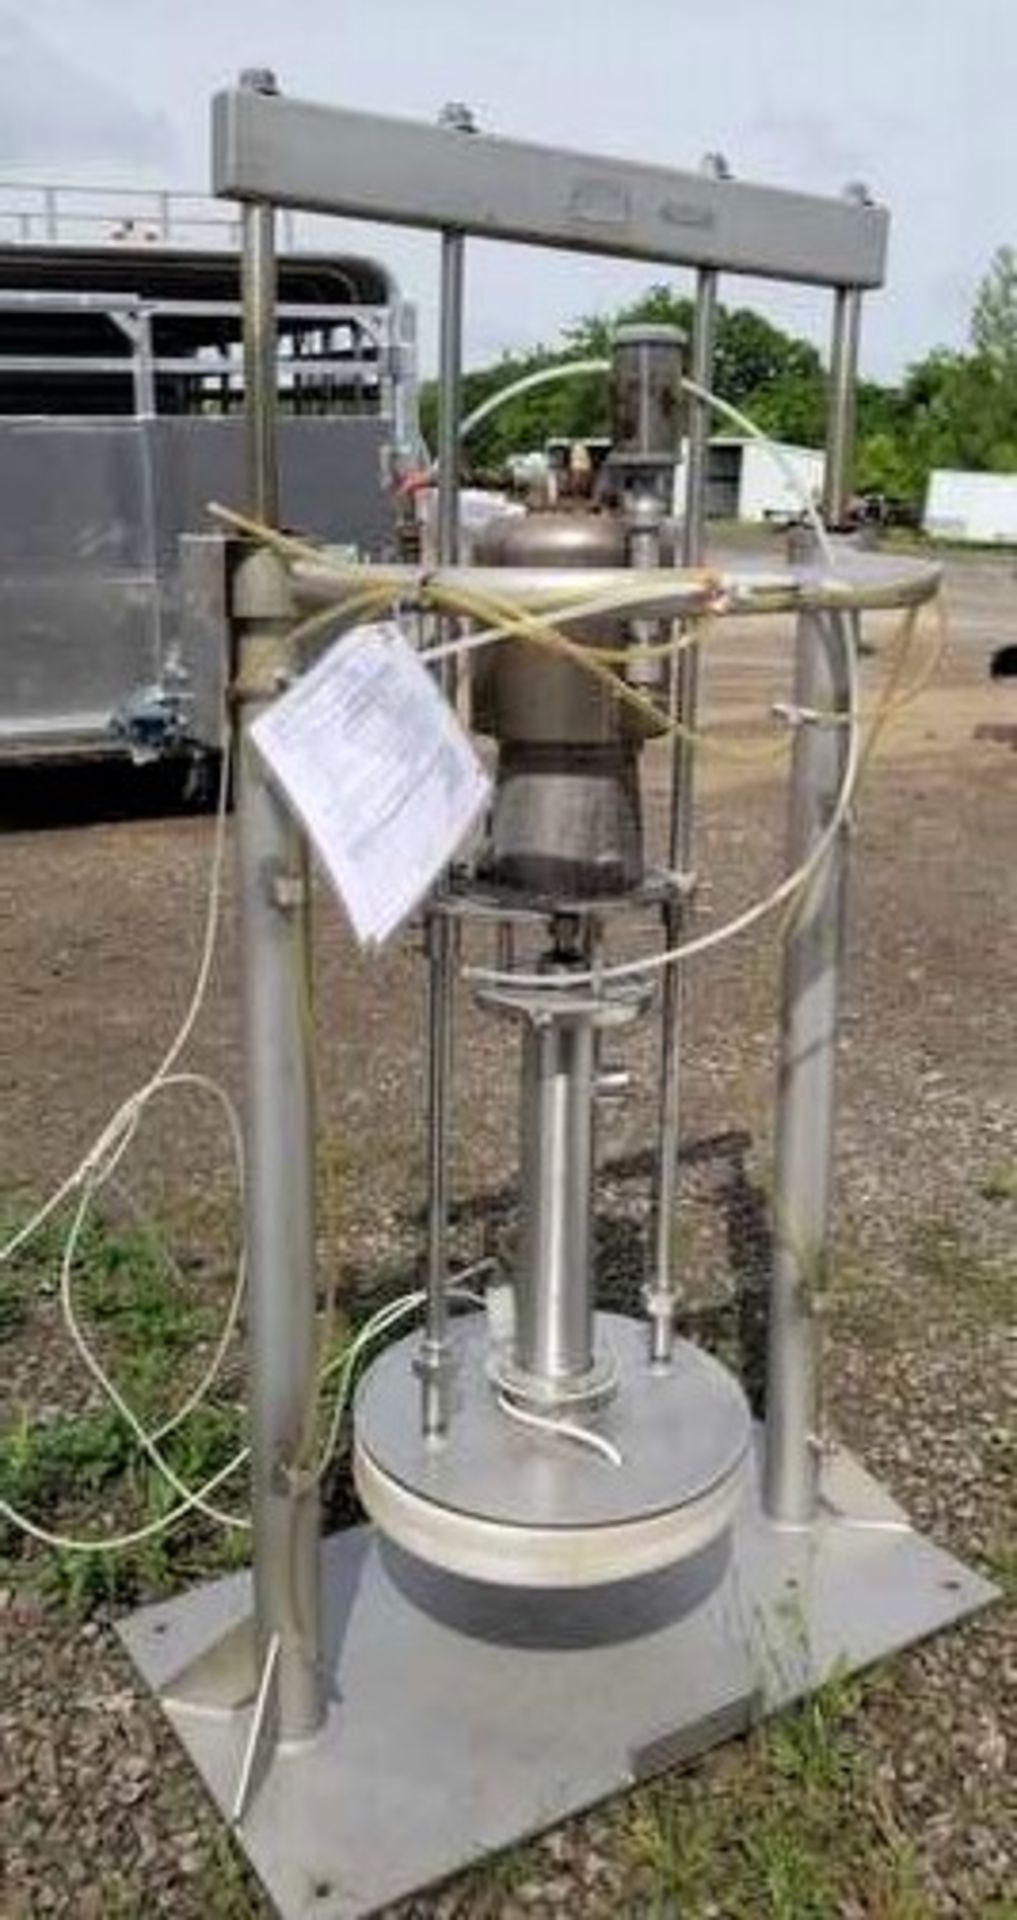 Grayco Barrel Pump. S/S Grayco "Senator" pneumatic Barrel Pump. Complete and ready to work. Came out